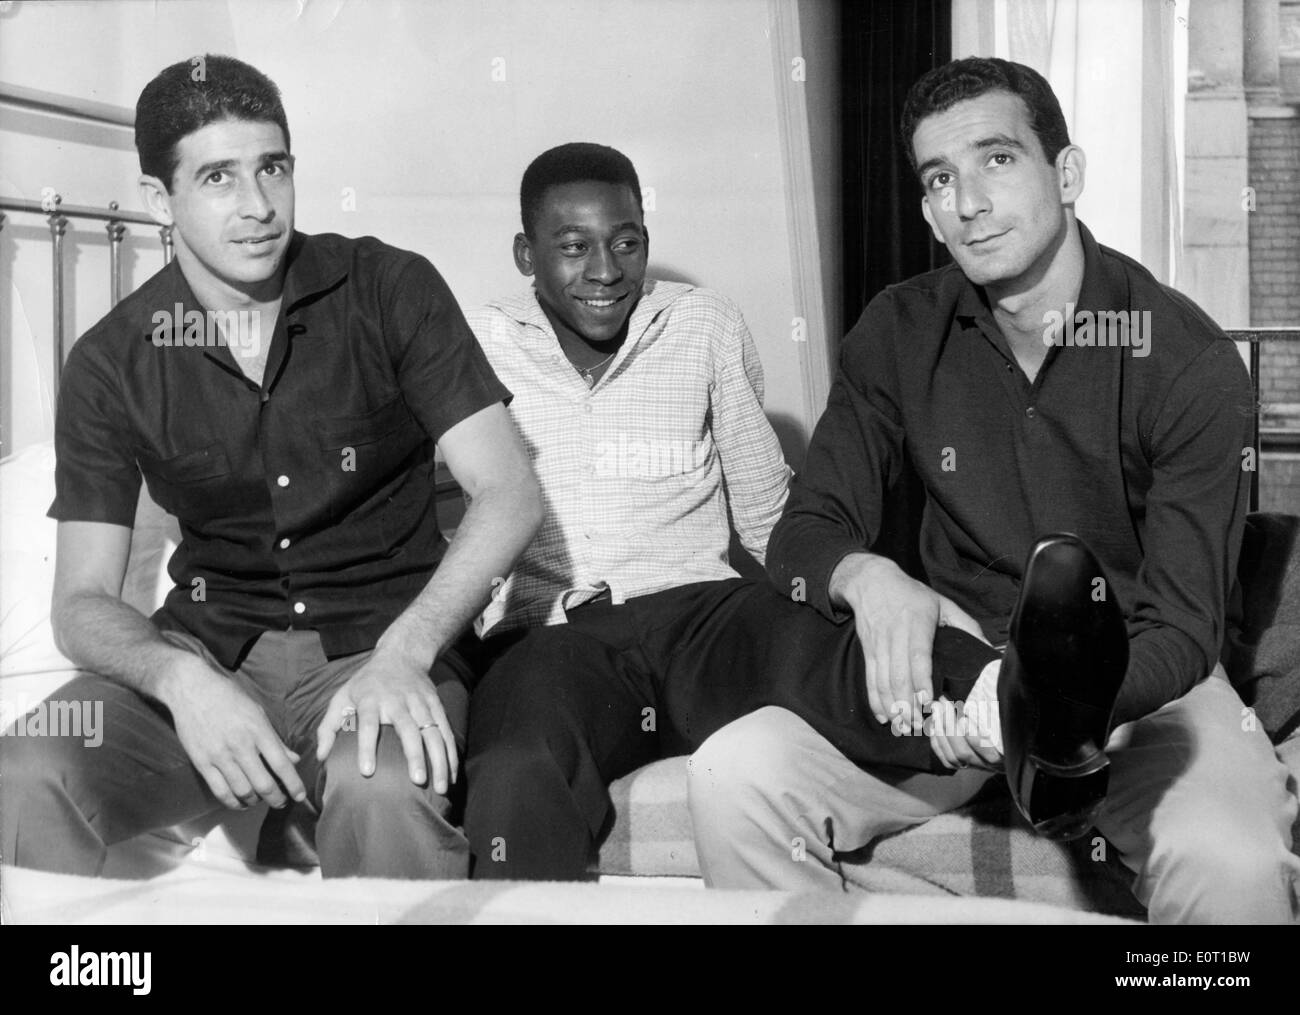 Soccer player Pele with friends Stock Photo